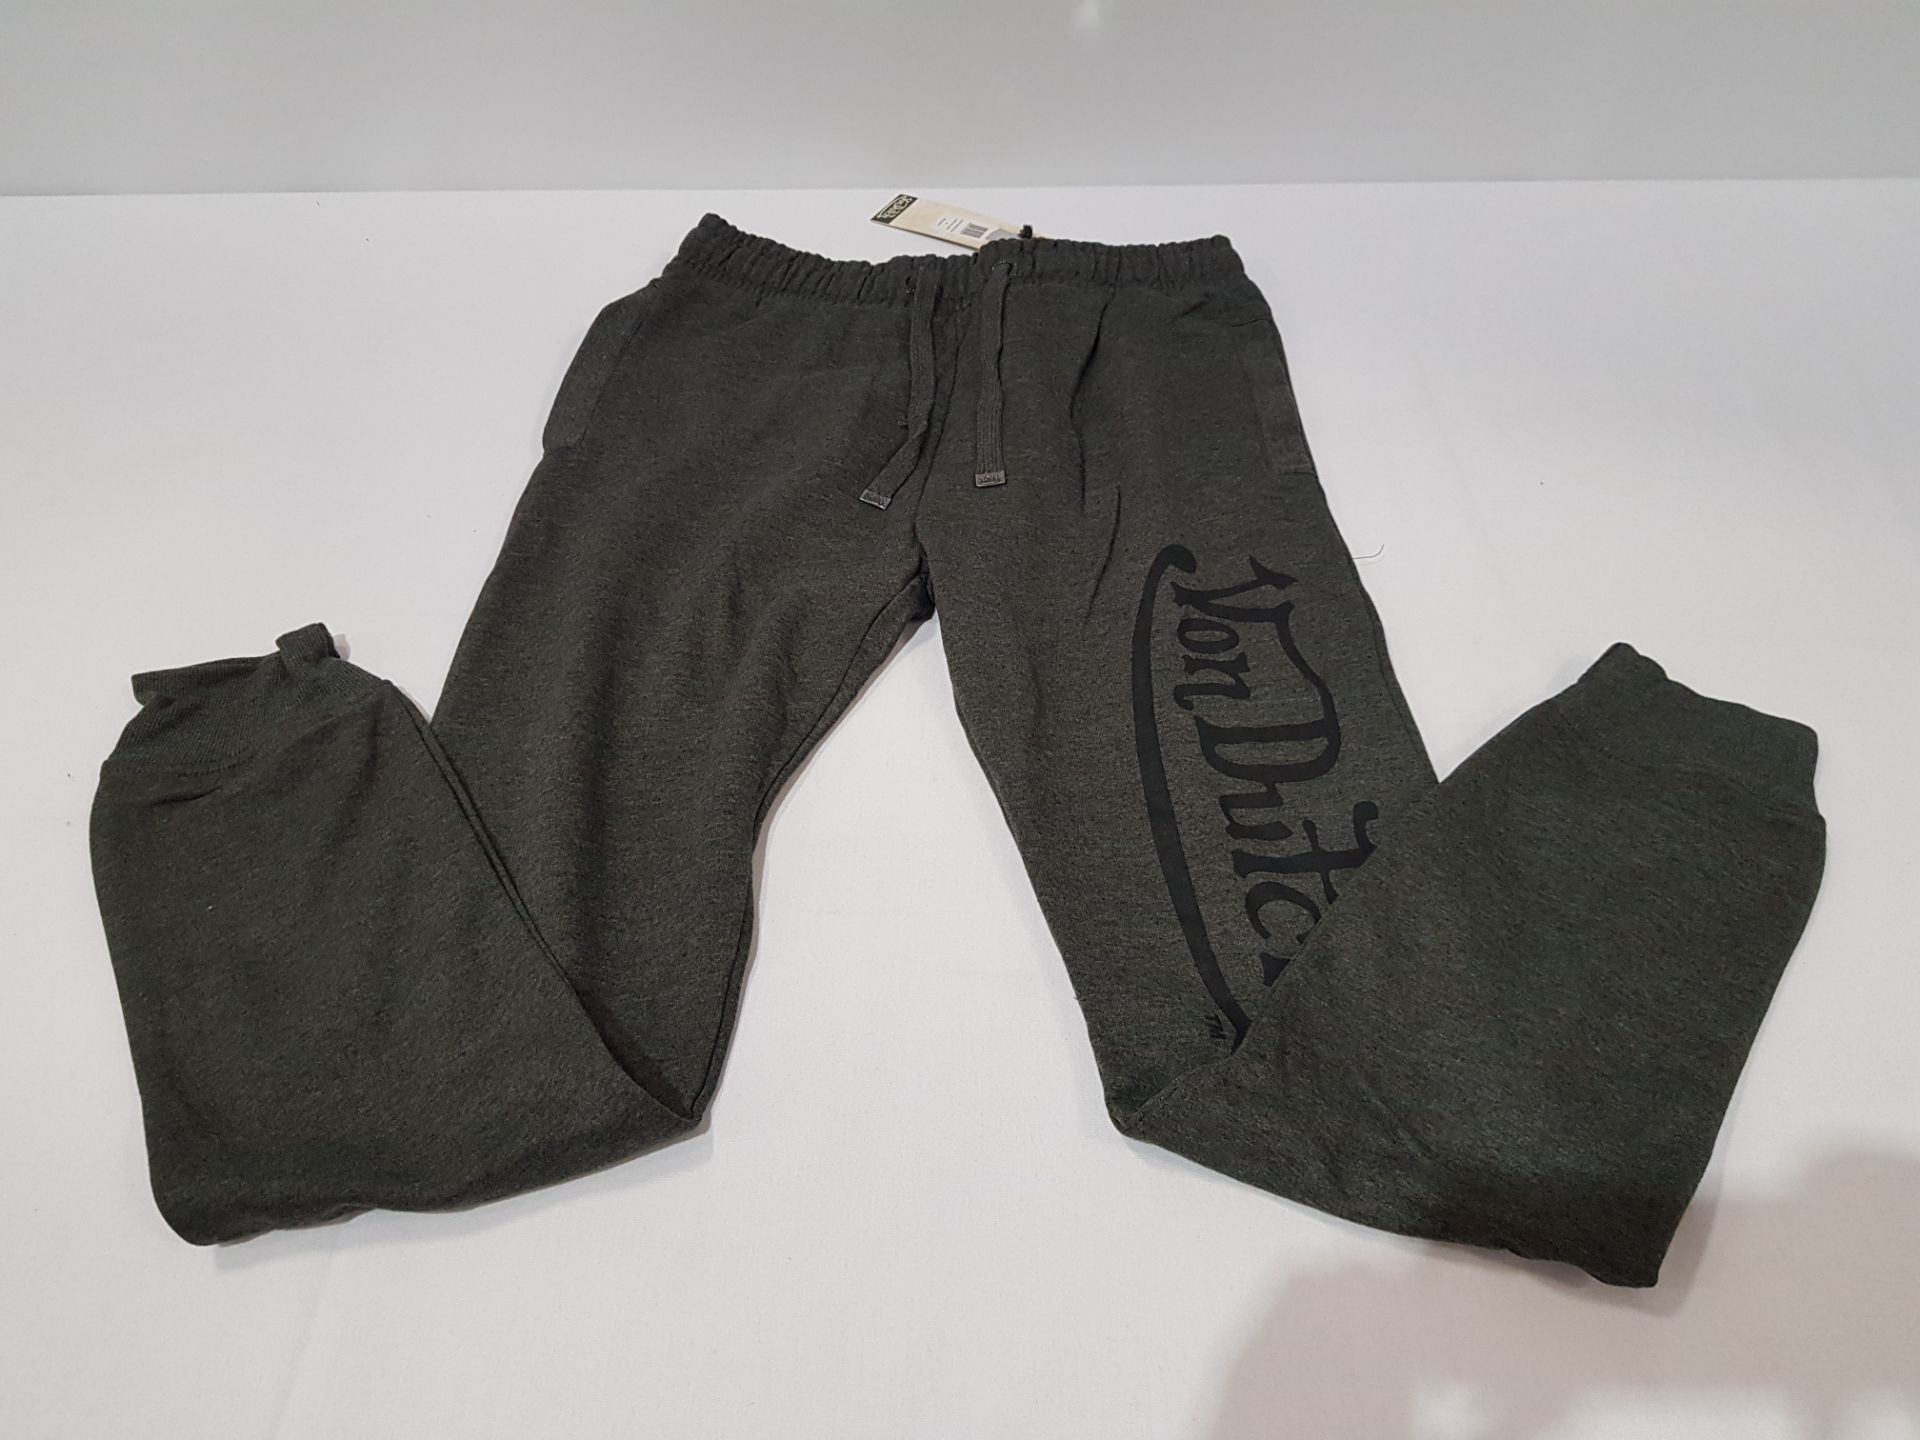 8X BRAND NEW DESIGNER VON DUTCH JOGGERS IN CHARCOAL SIZE MEDIUM (RRP £53.99 EACH - TOTAL £431) IN